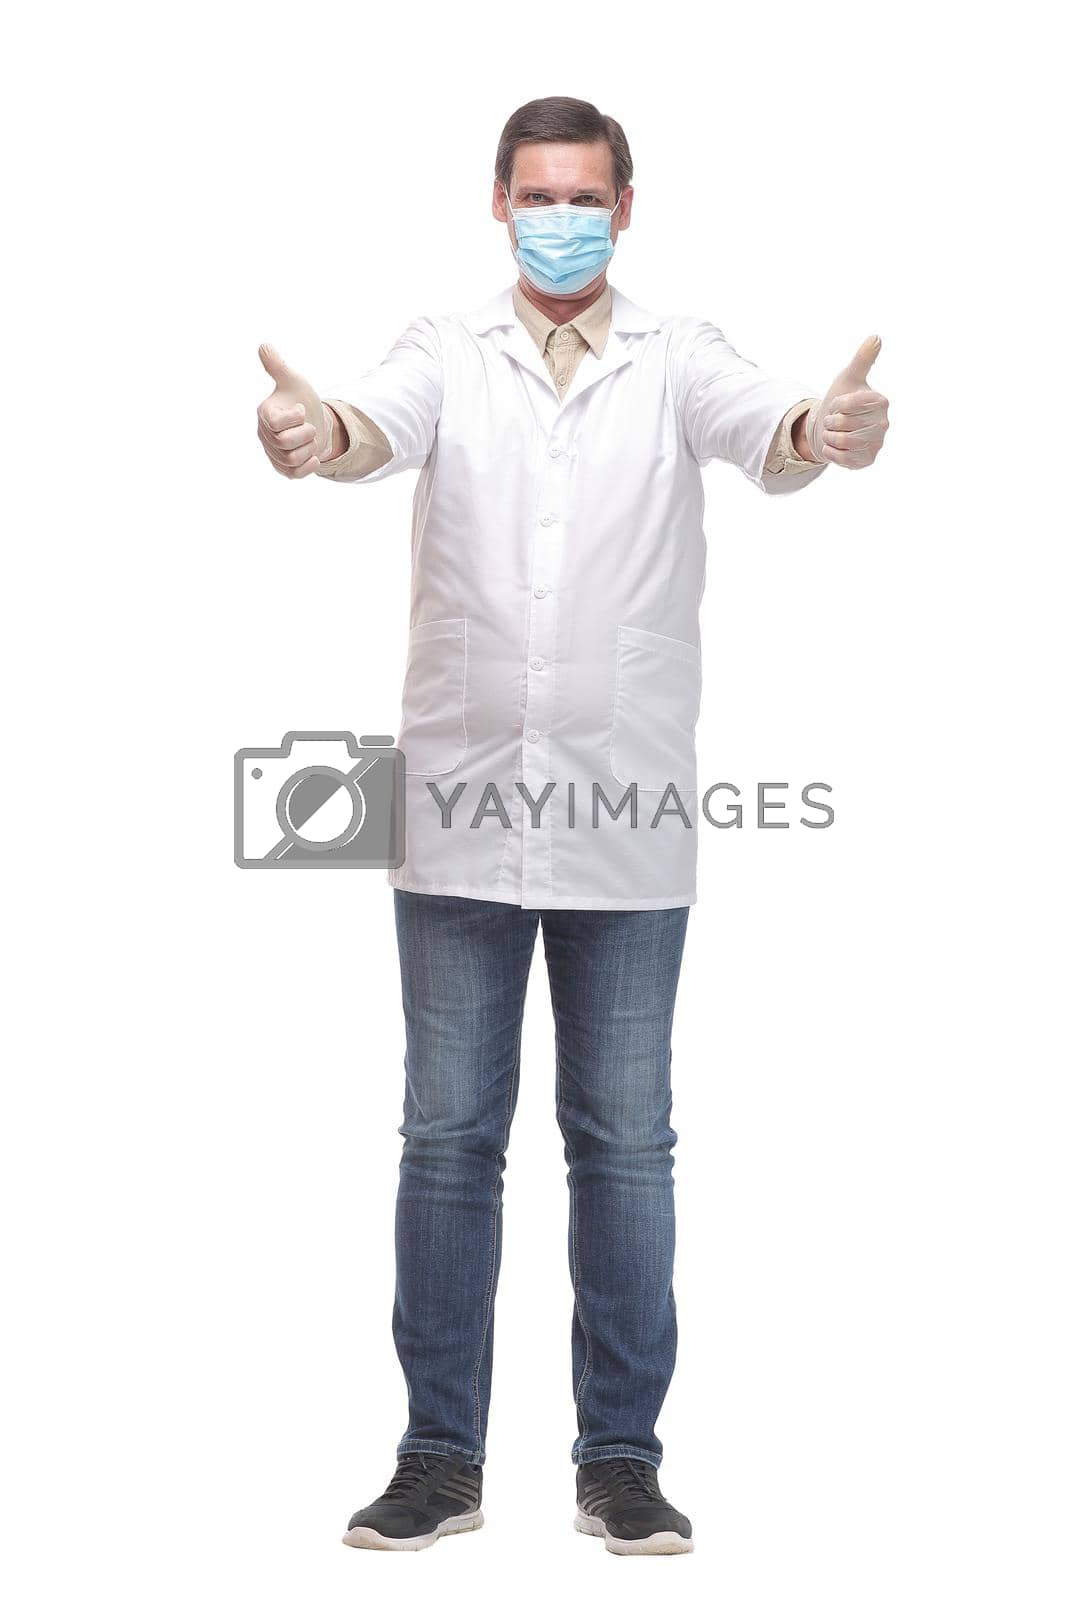 Royalty free image of Portrait of caucasian doctor using protective gloves and mask by asdf